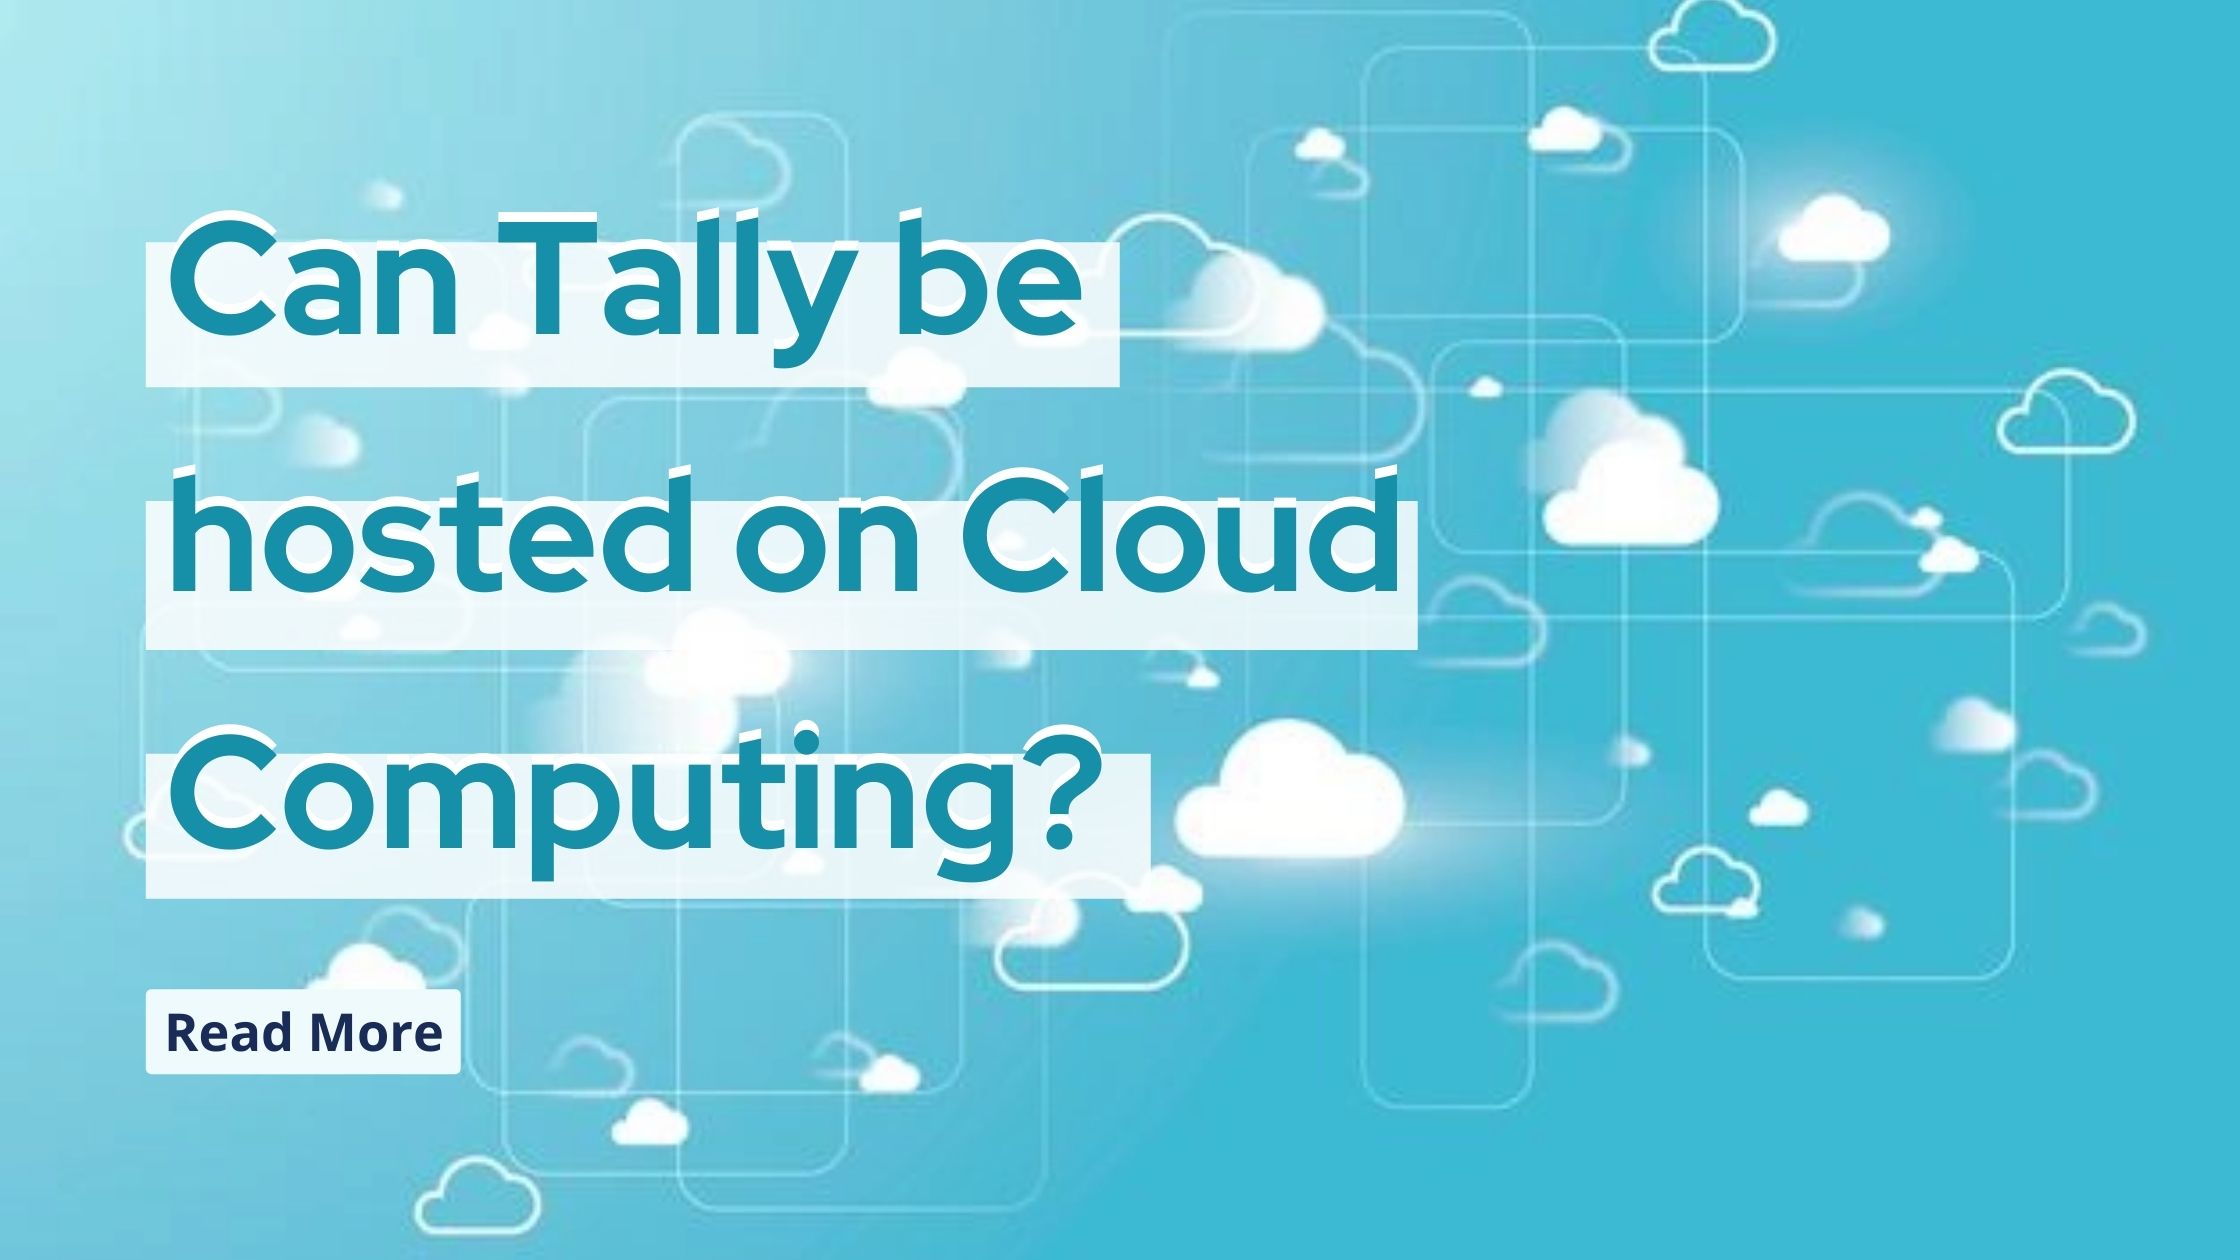 Tally hosted on Cloud computing